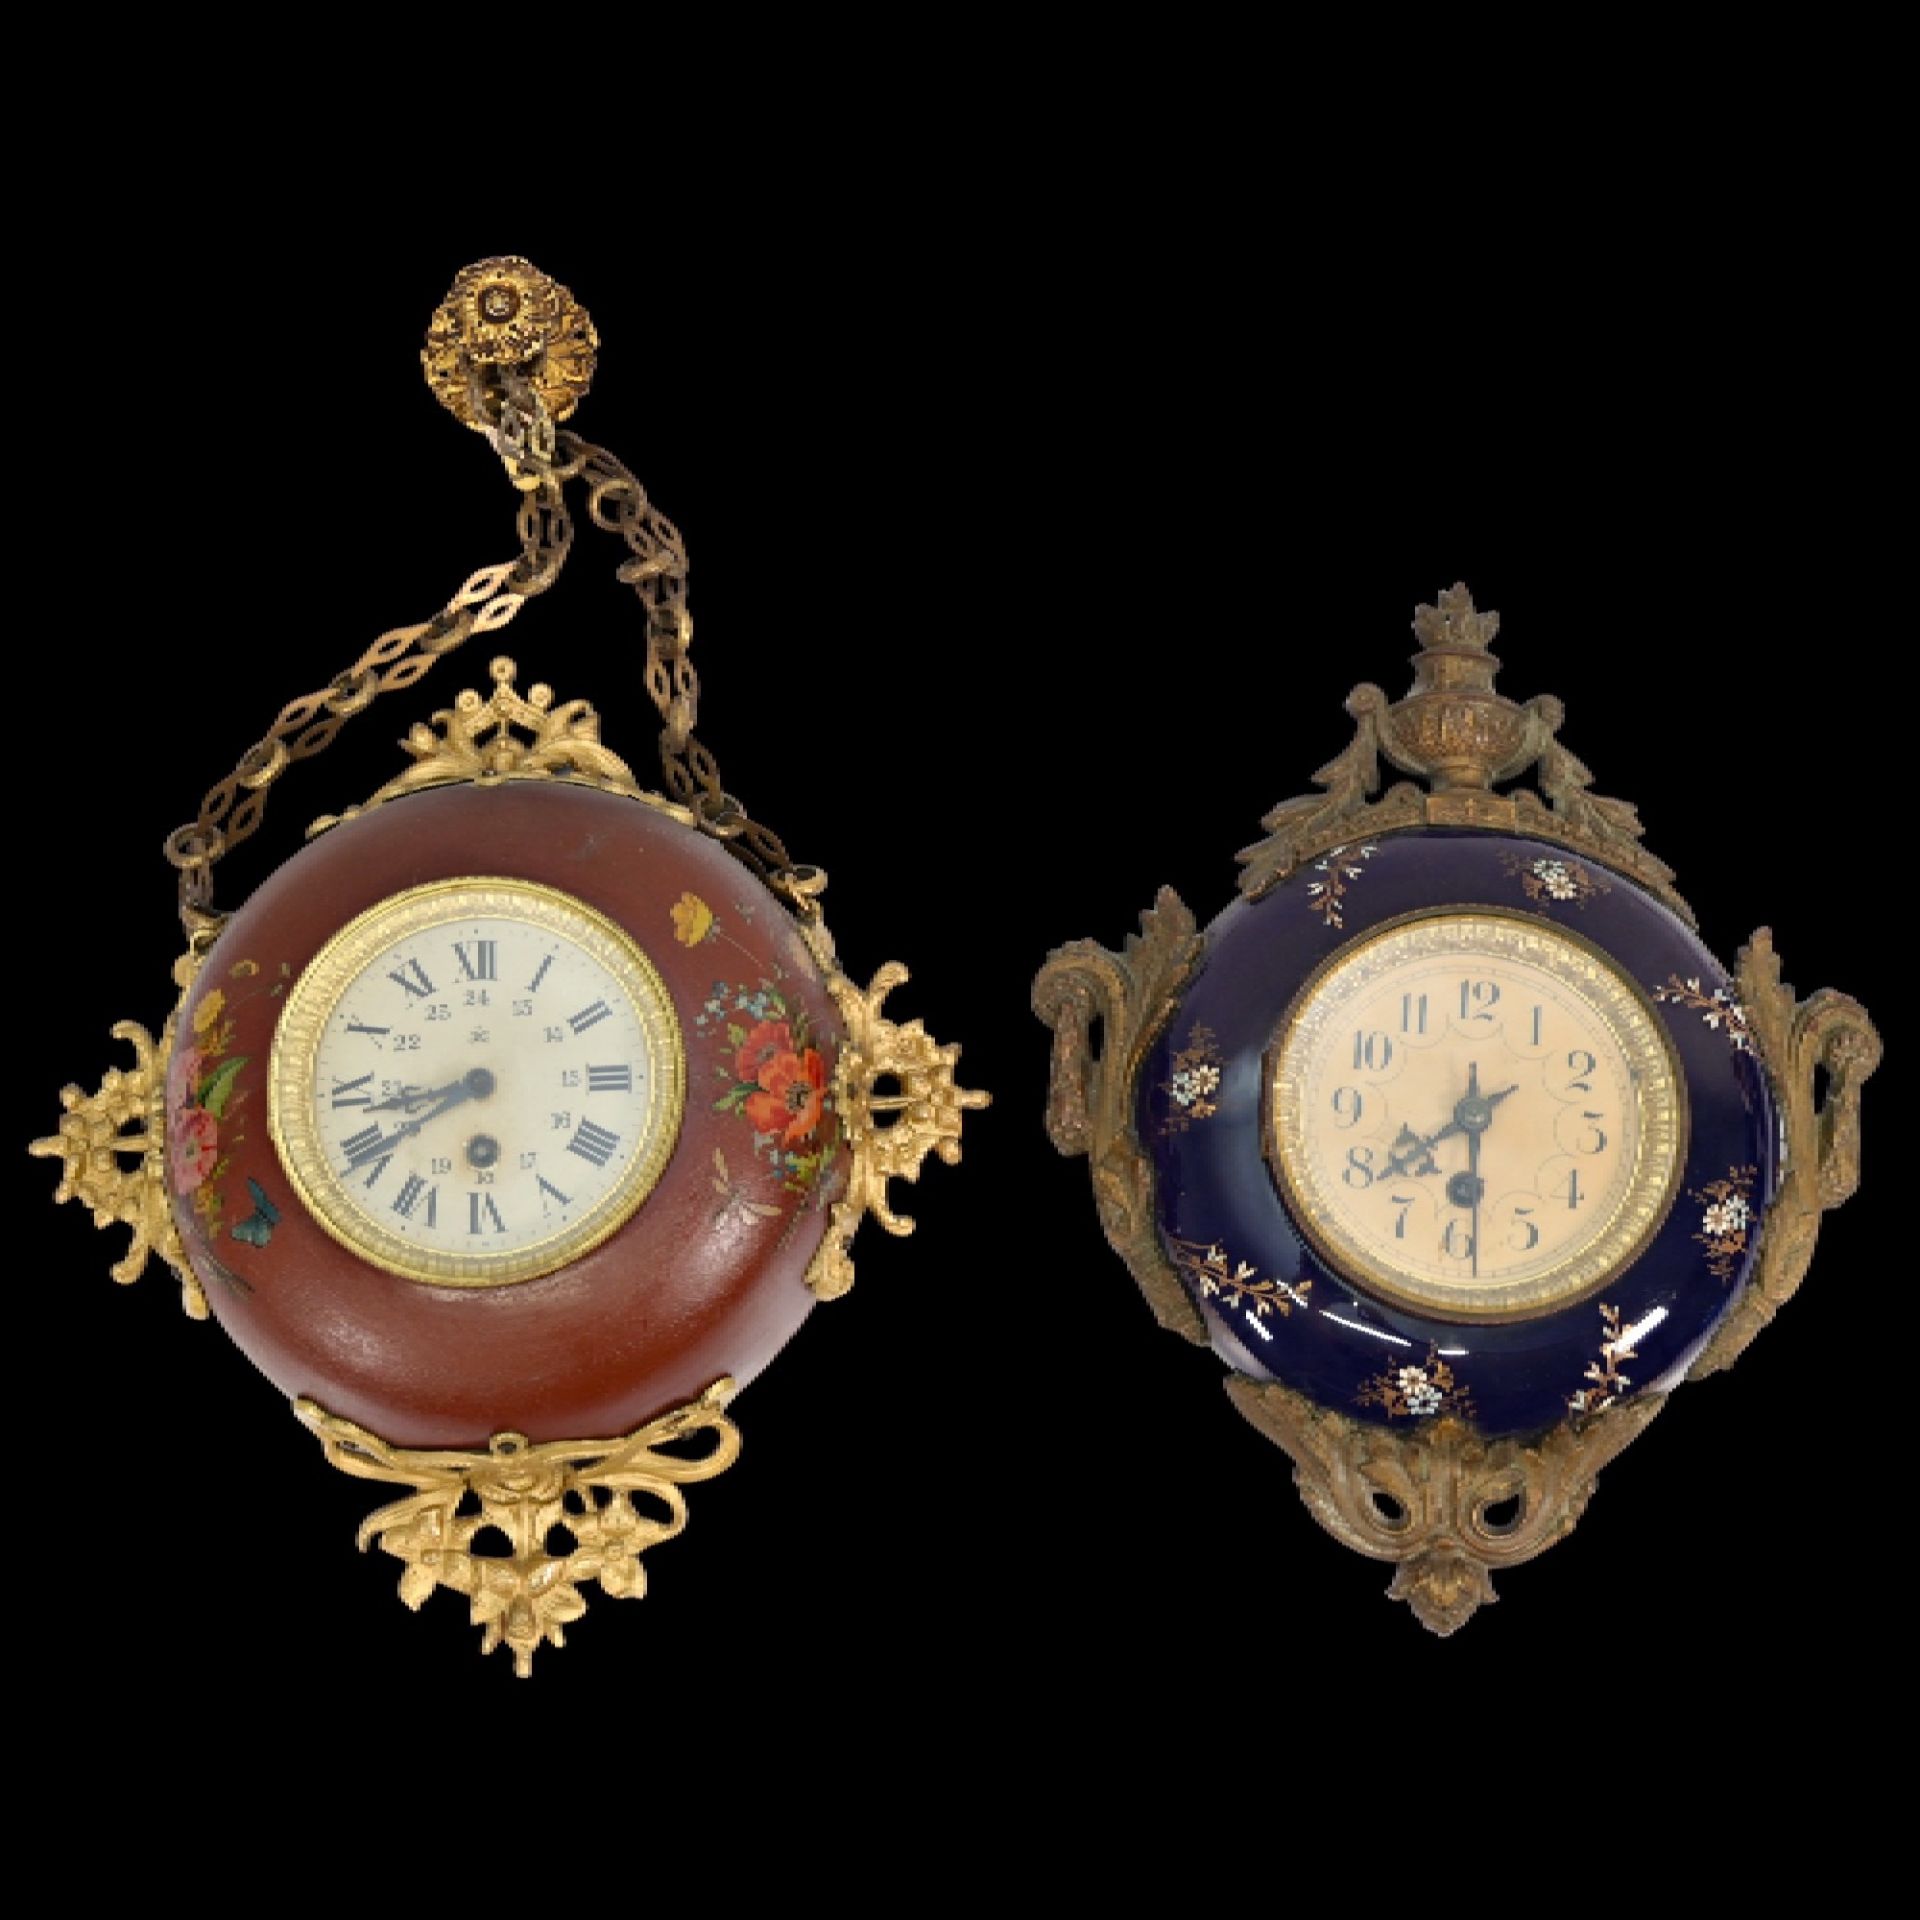 Set of two wall clocks, France, 19th-20th century.